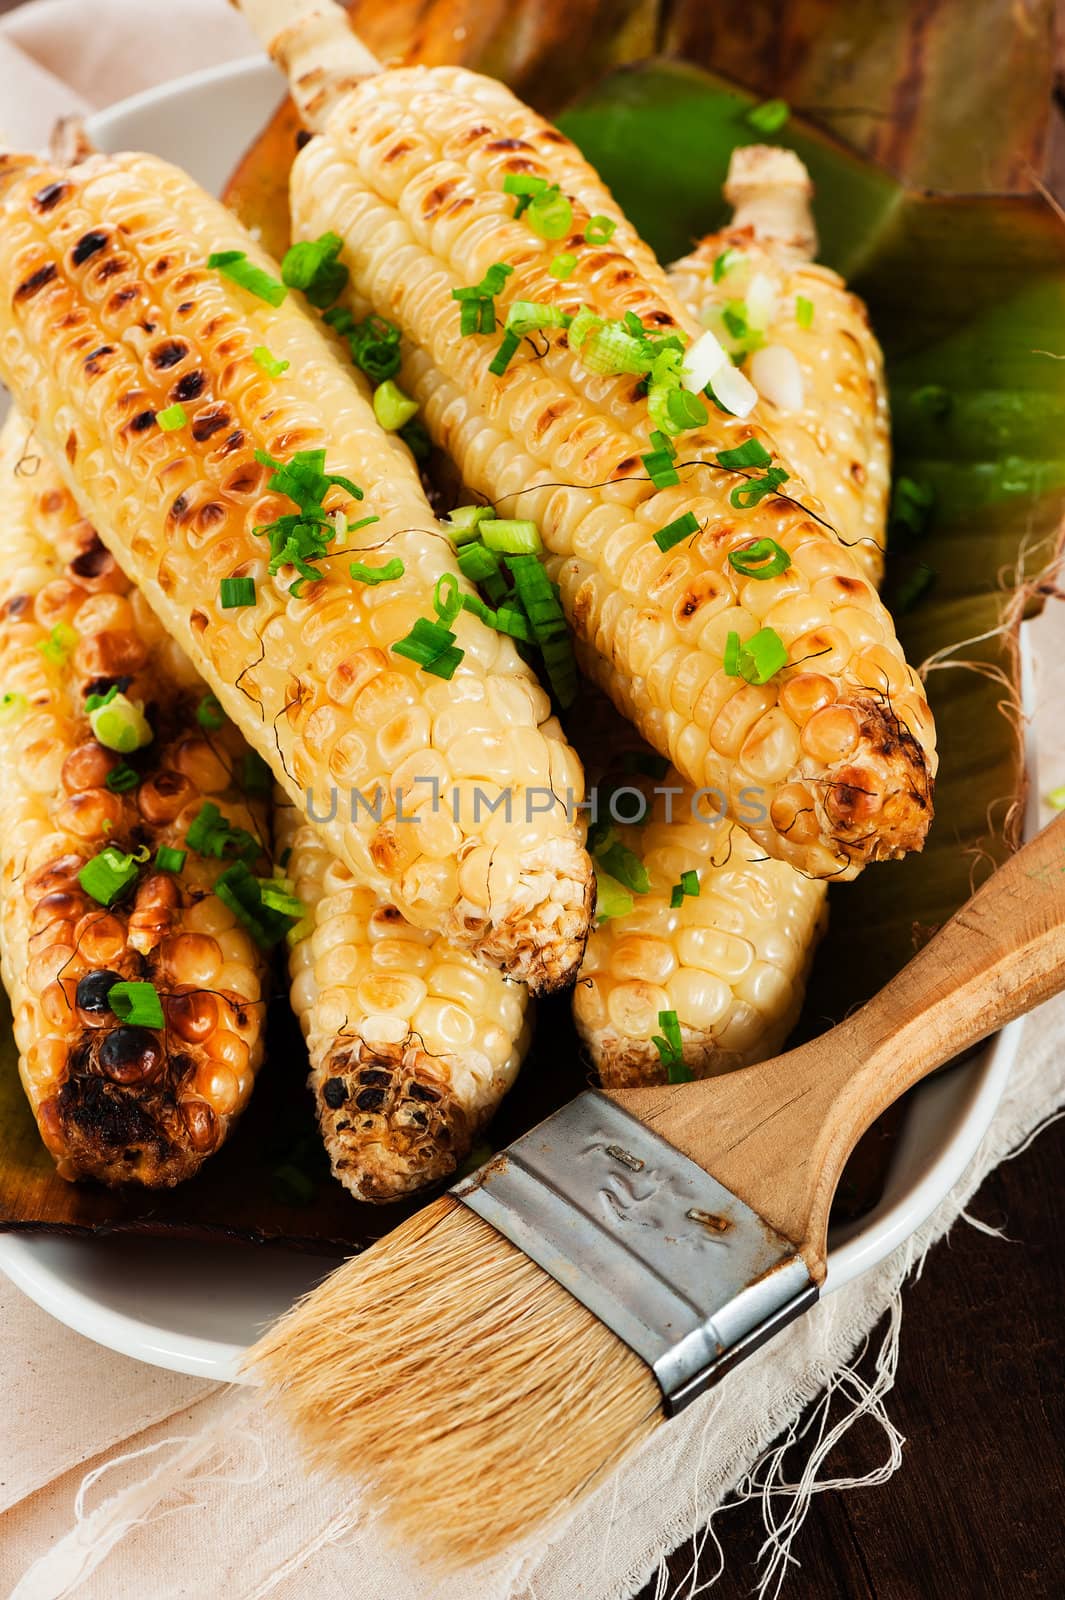 Barbecued corn cobs with herbs on a white plate and a wooden table